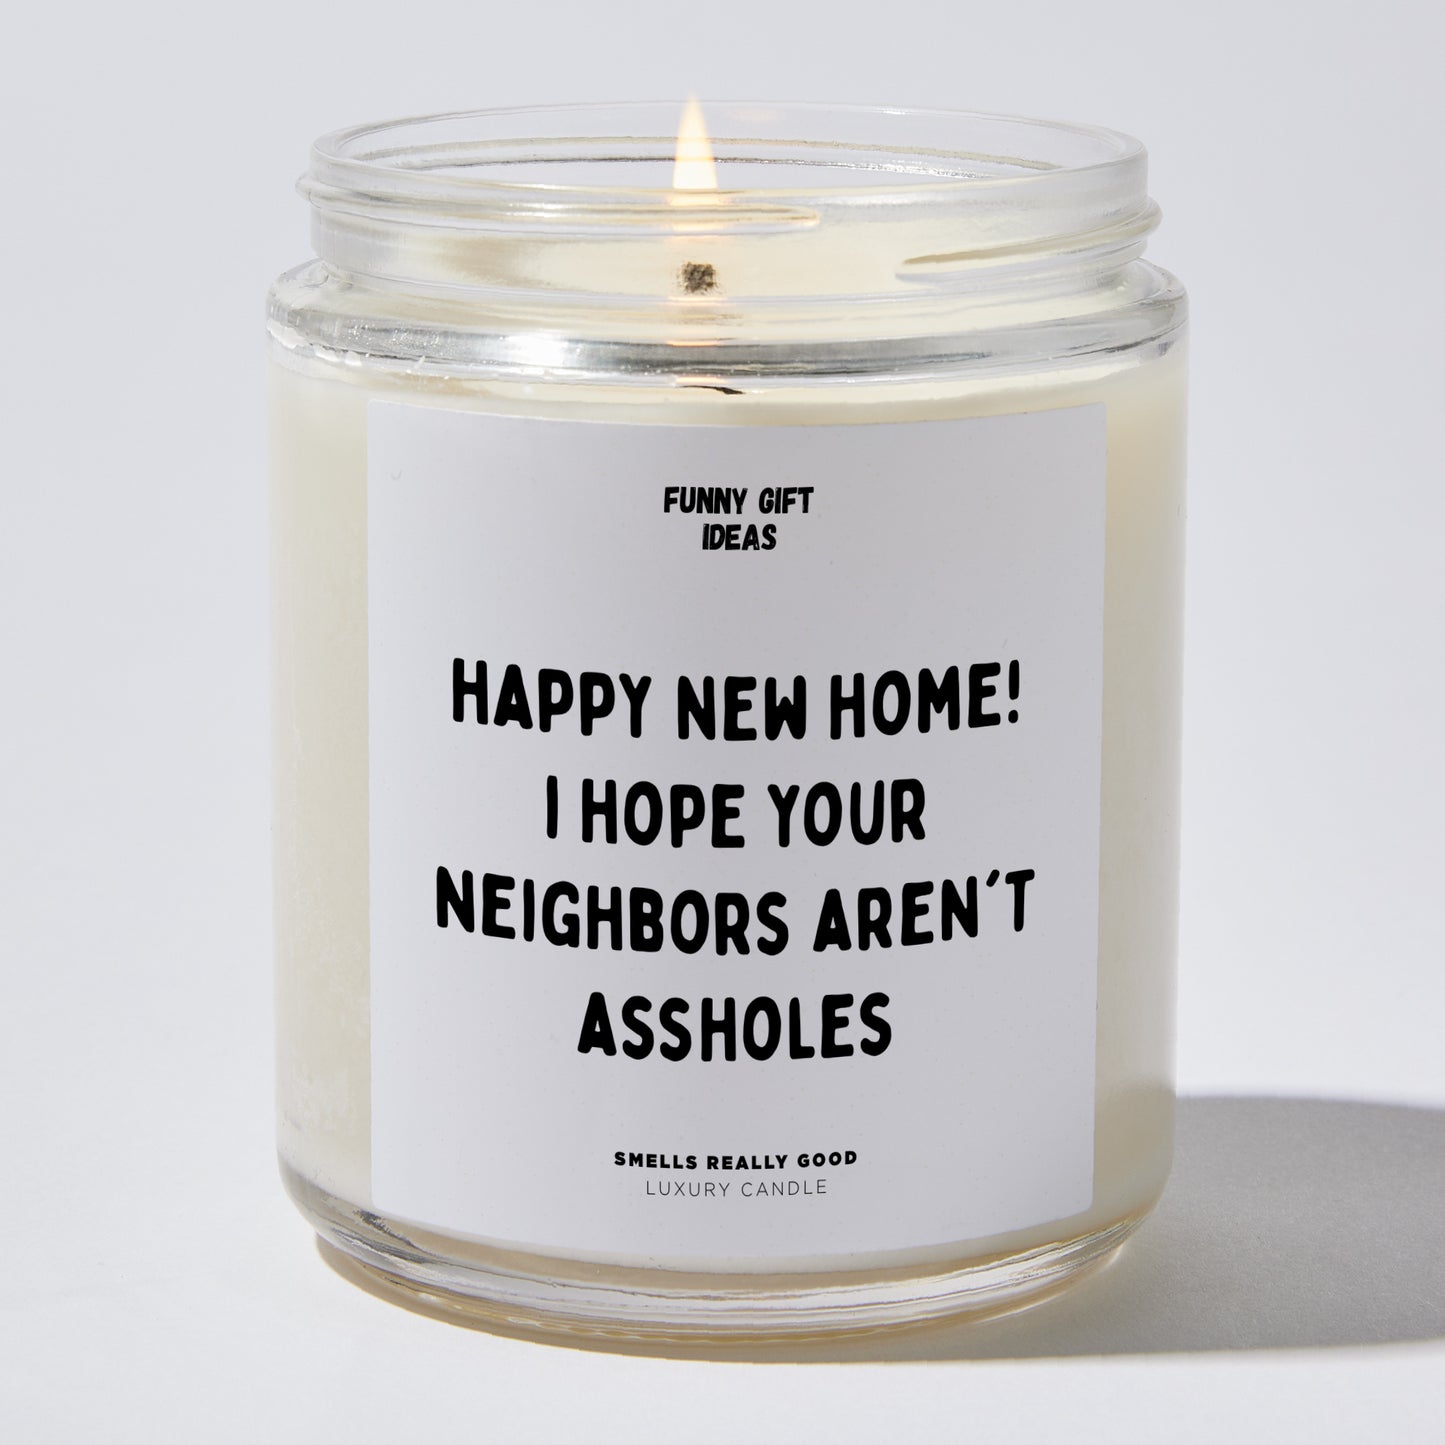 Unique Housewarming Gift - Happy New Home! I Hope Your Neighbors Aren't Assholes - Candle